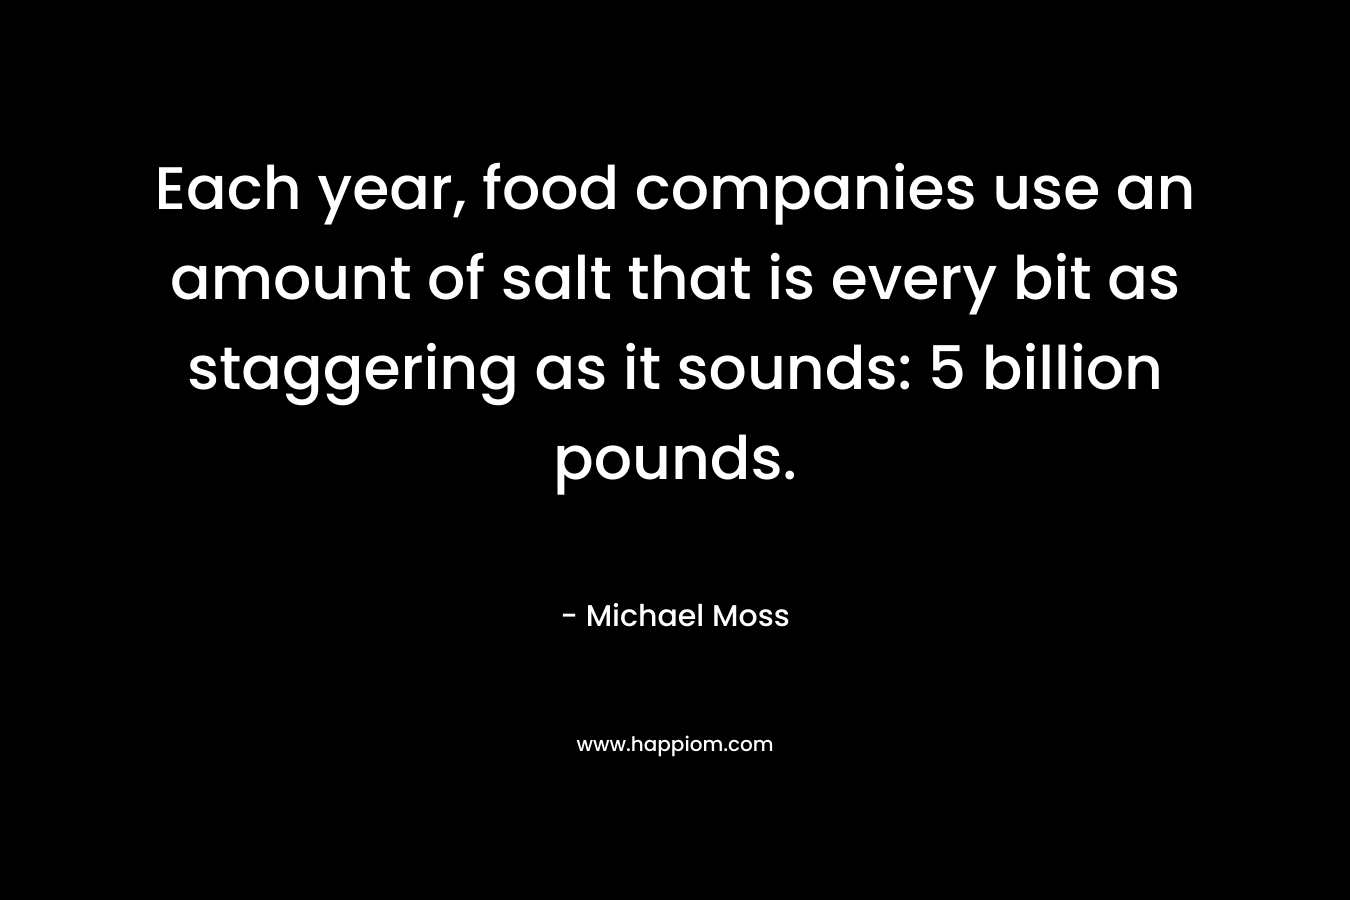 Each year, food companies use an amount of salt that is every bit as staggering as it sounds: 5 billion pounds. – Michael Moss